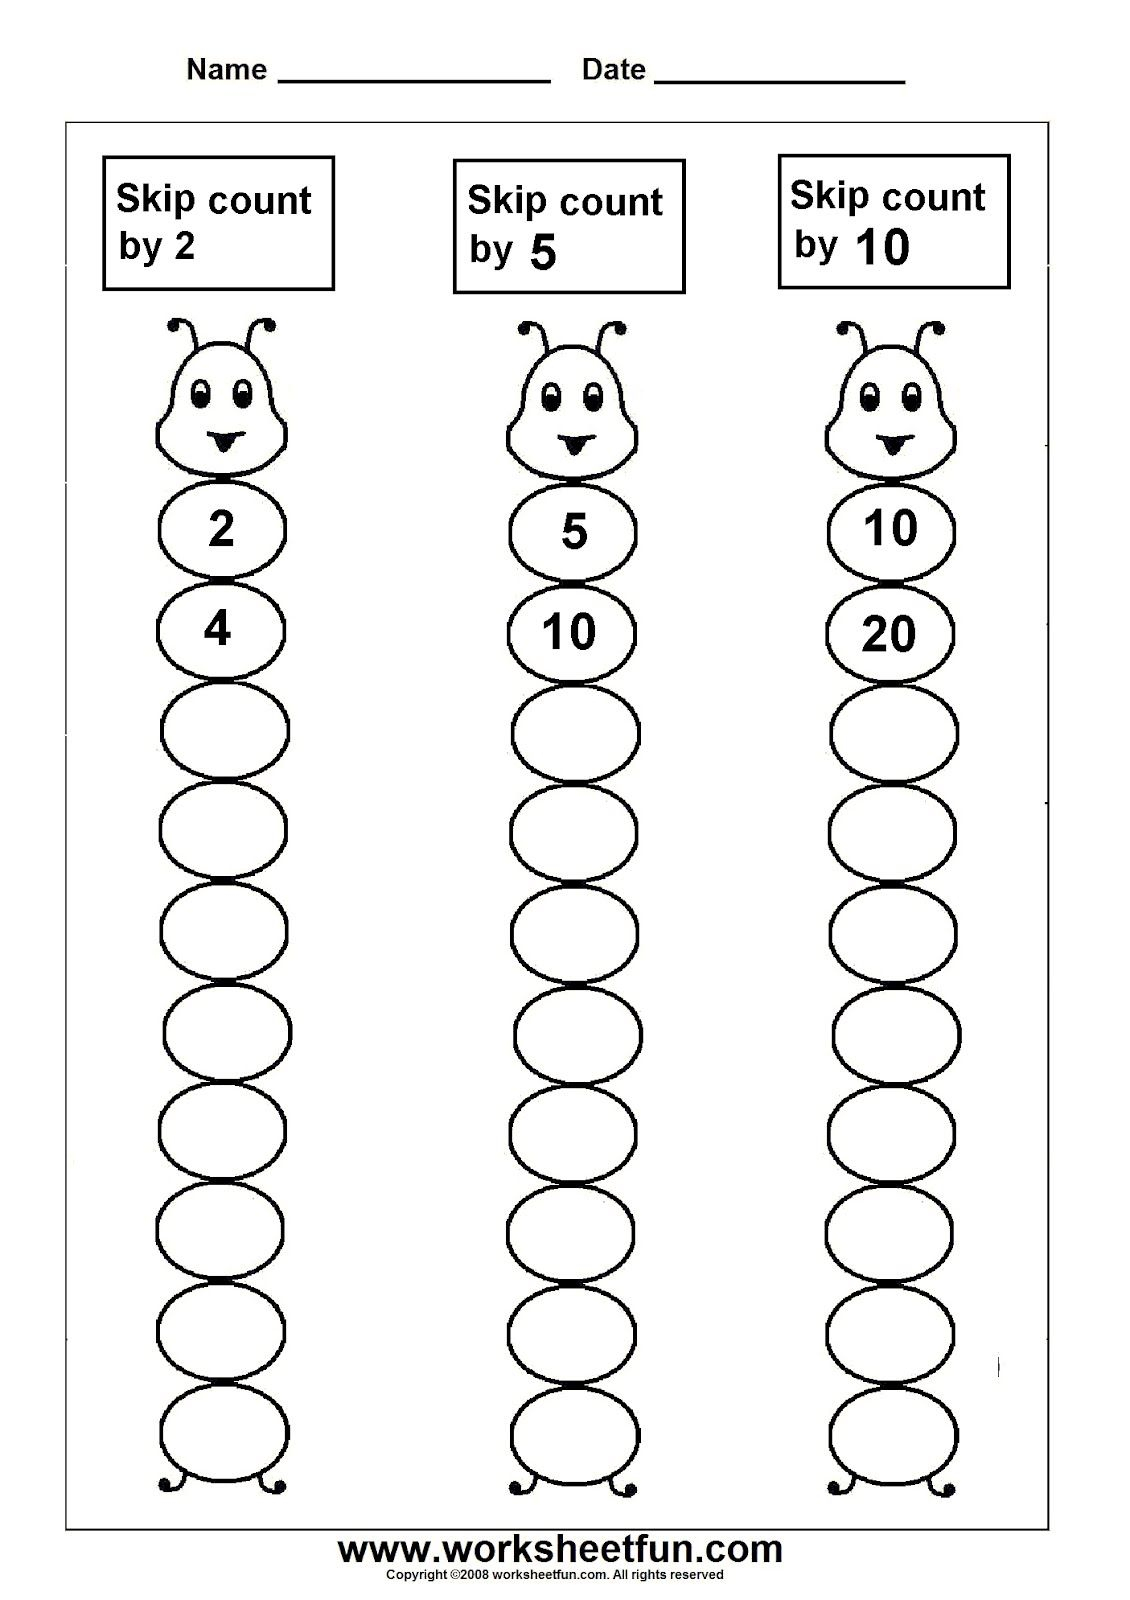 Skip Count | Skip Counting2,5 And 10 - Bug Theme - Counting | Counting In Twos Worksheet Printable